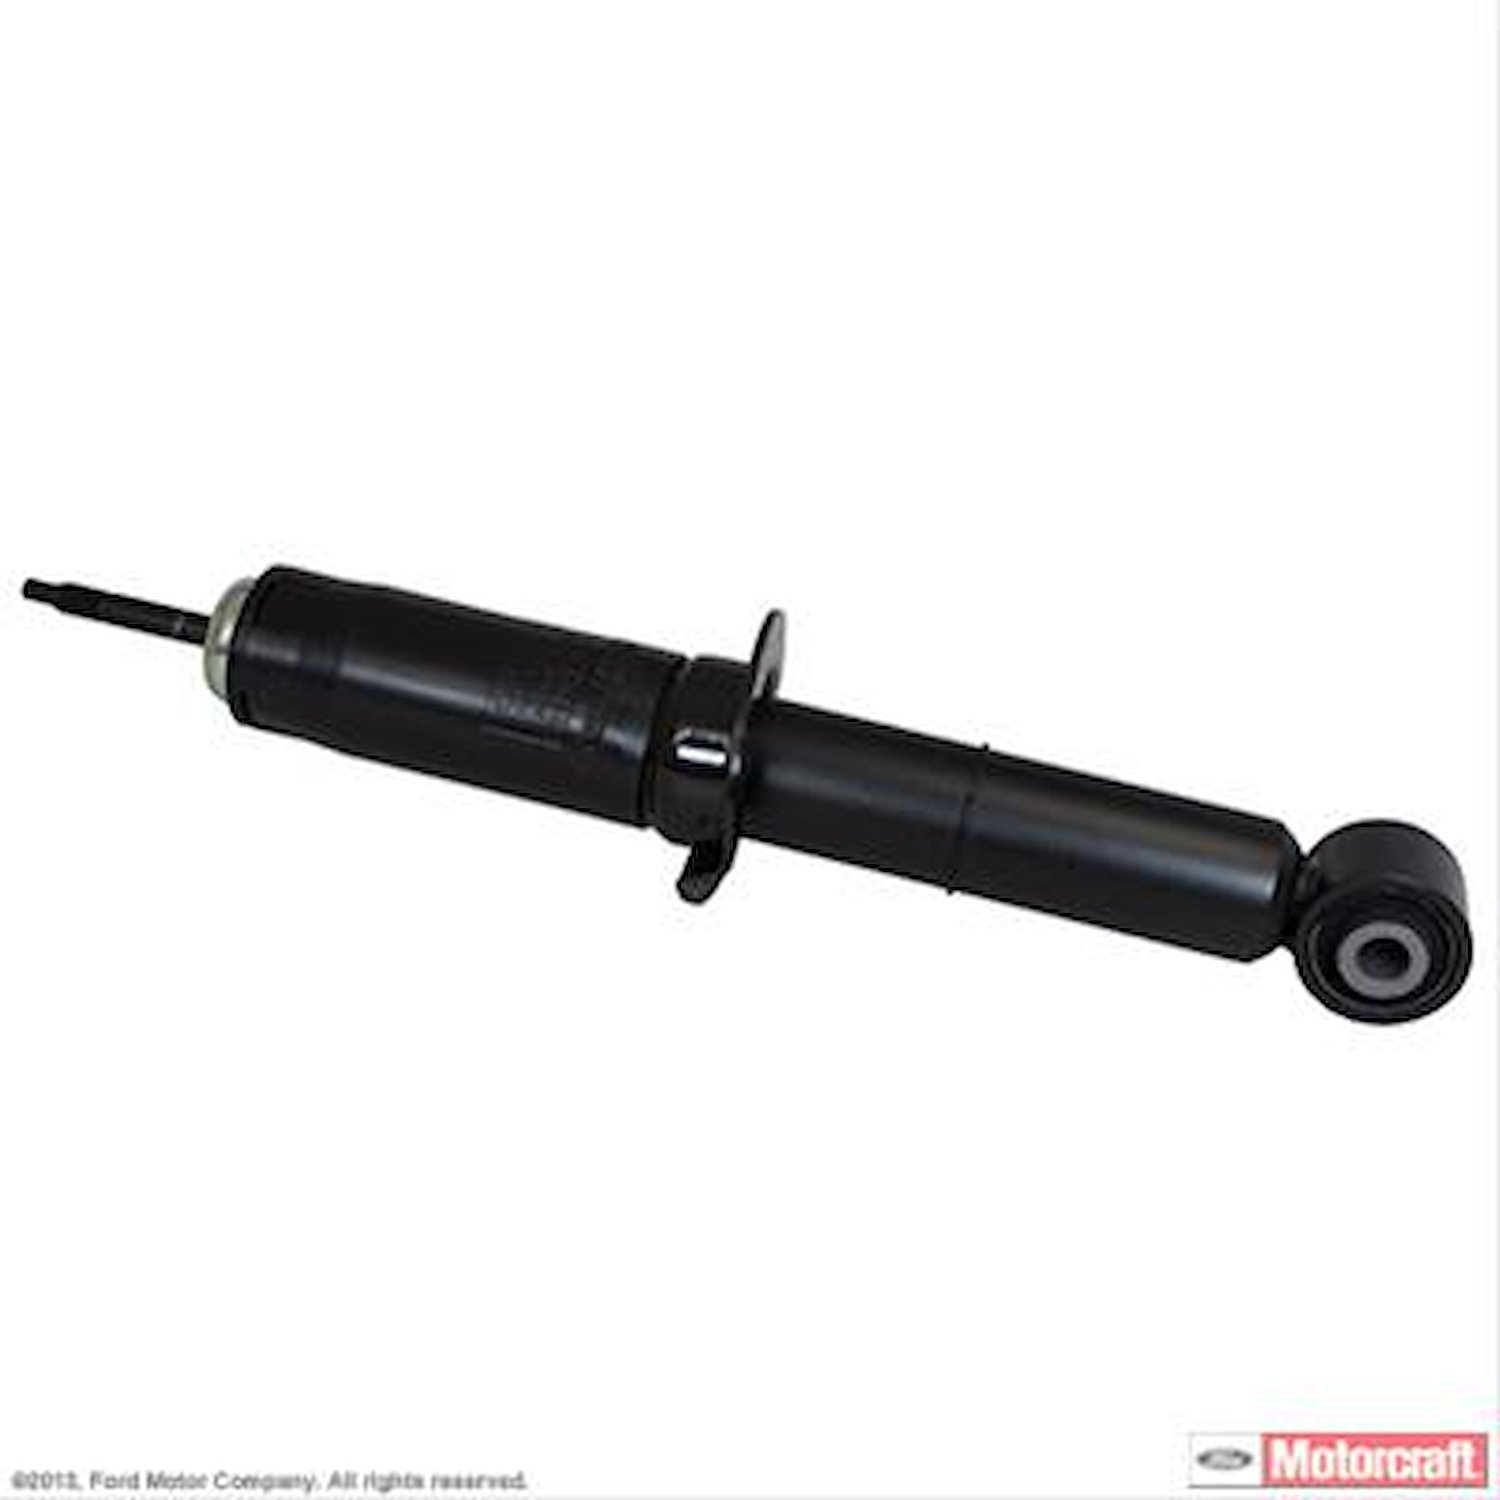 Shock Absorber for Select 2006-2011 Ford, Mercury